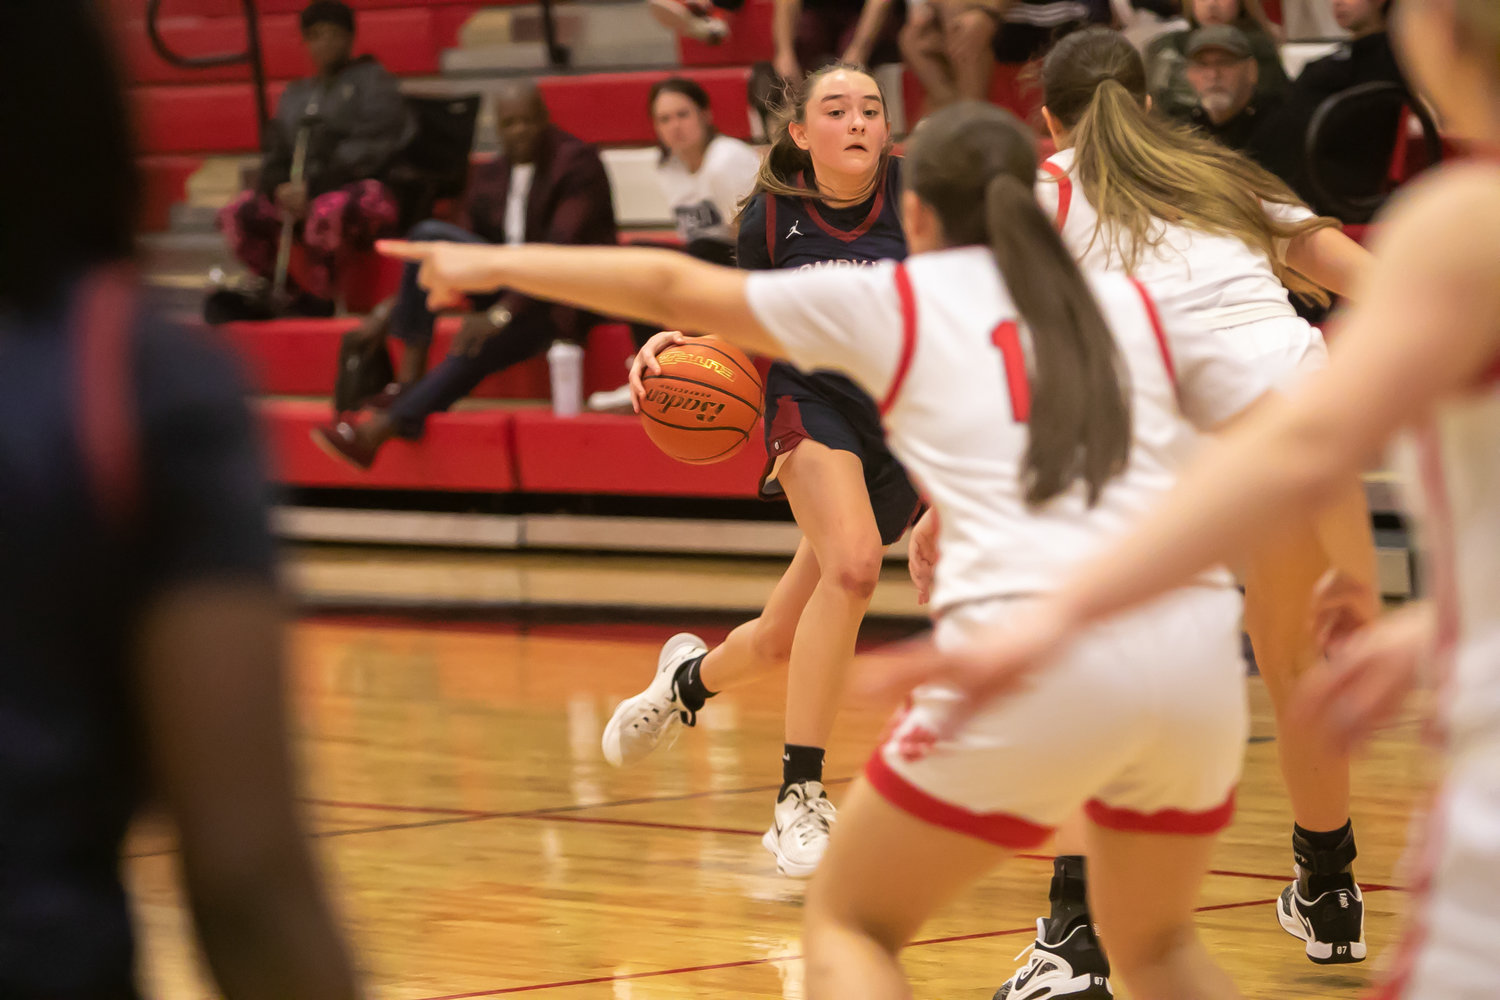 Macy Spencer dribbles into the lane during Tuesday's game between Katy and Tompkins at the Katy gym.